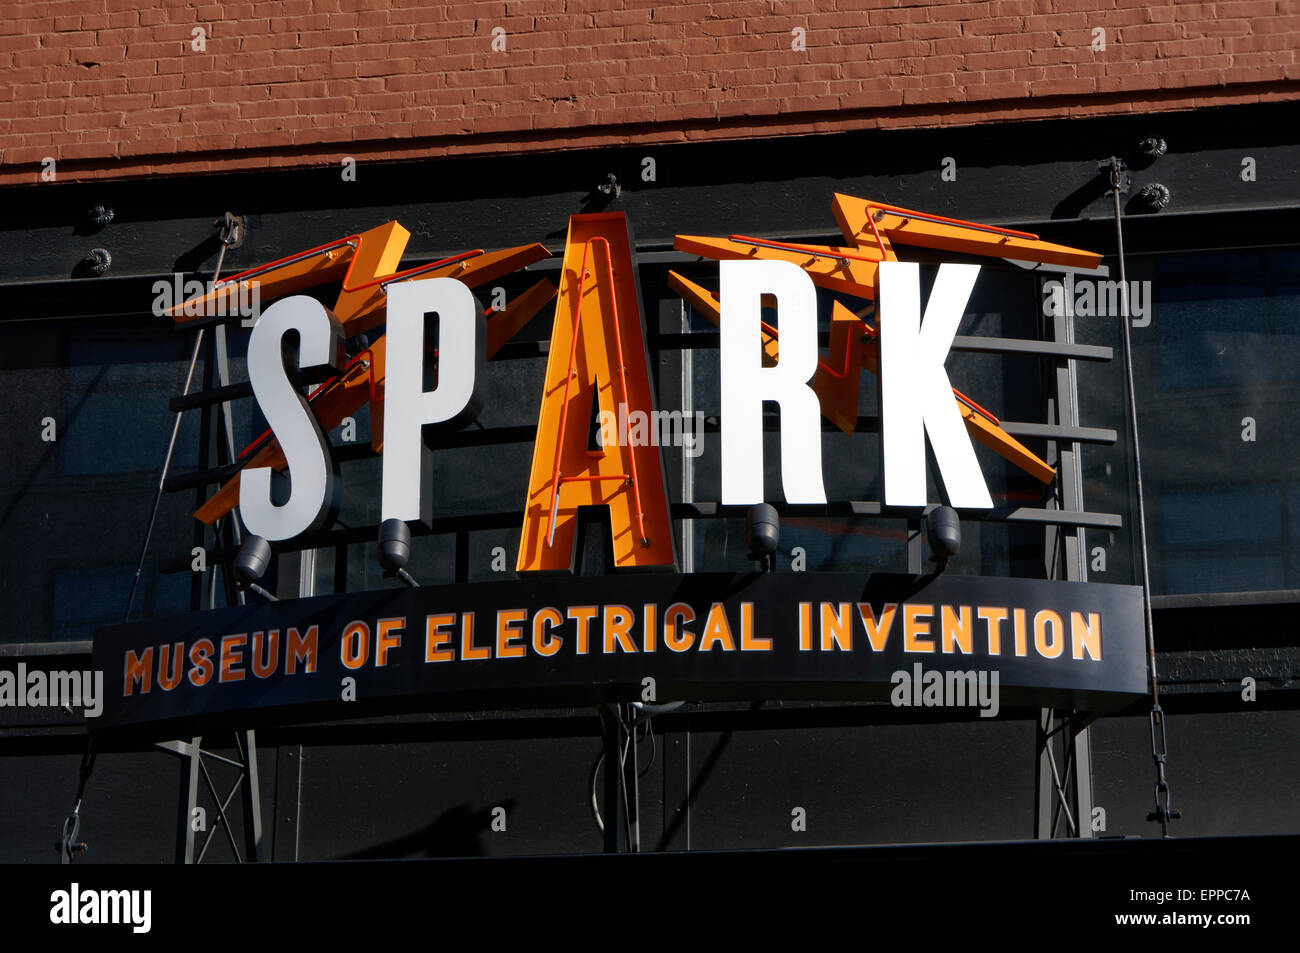 Spark Museum of Electrical Invention, Bellingham, Washington State, USA Stockfoto